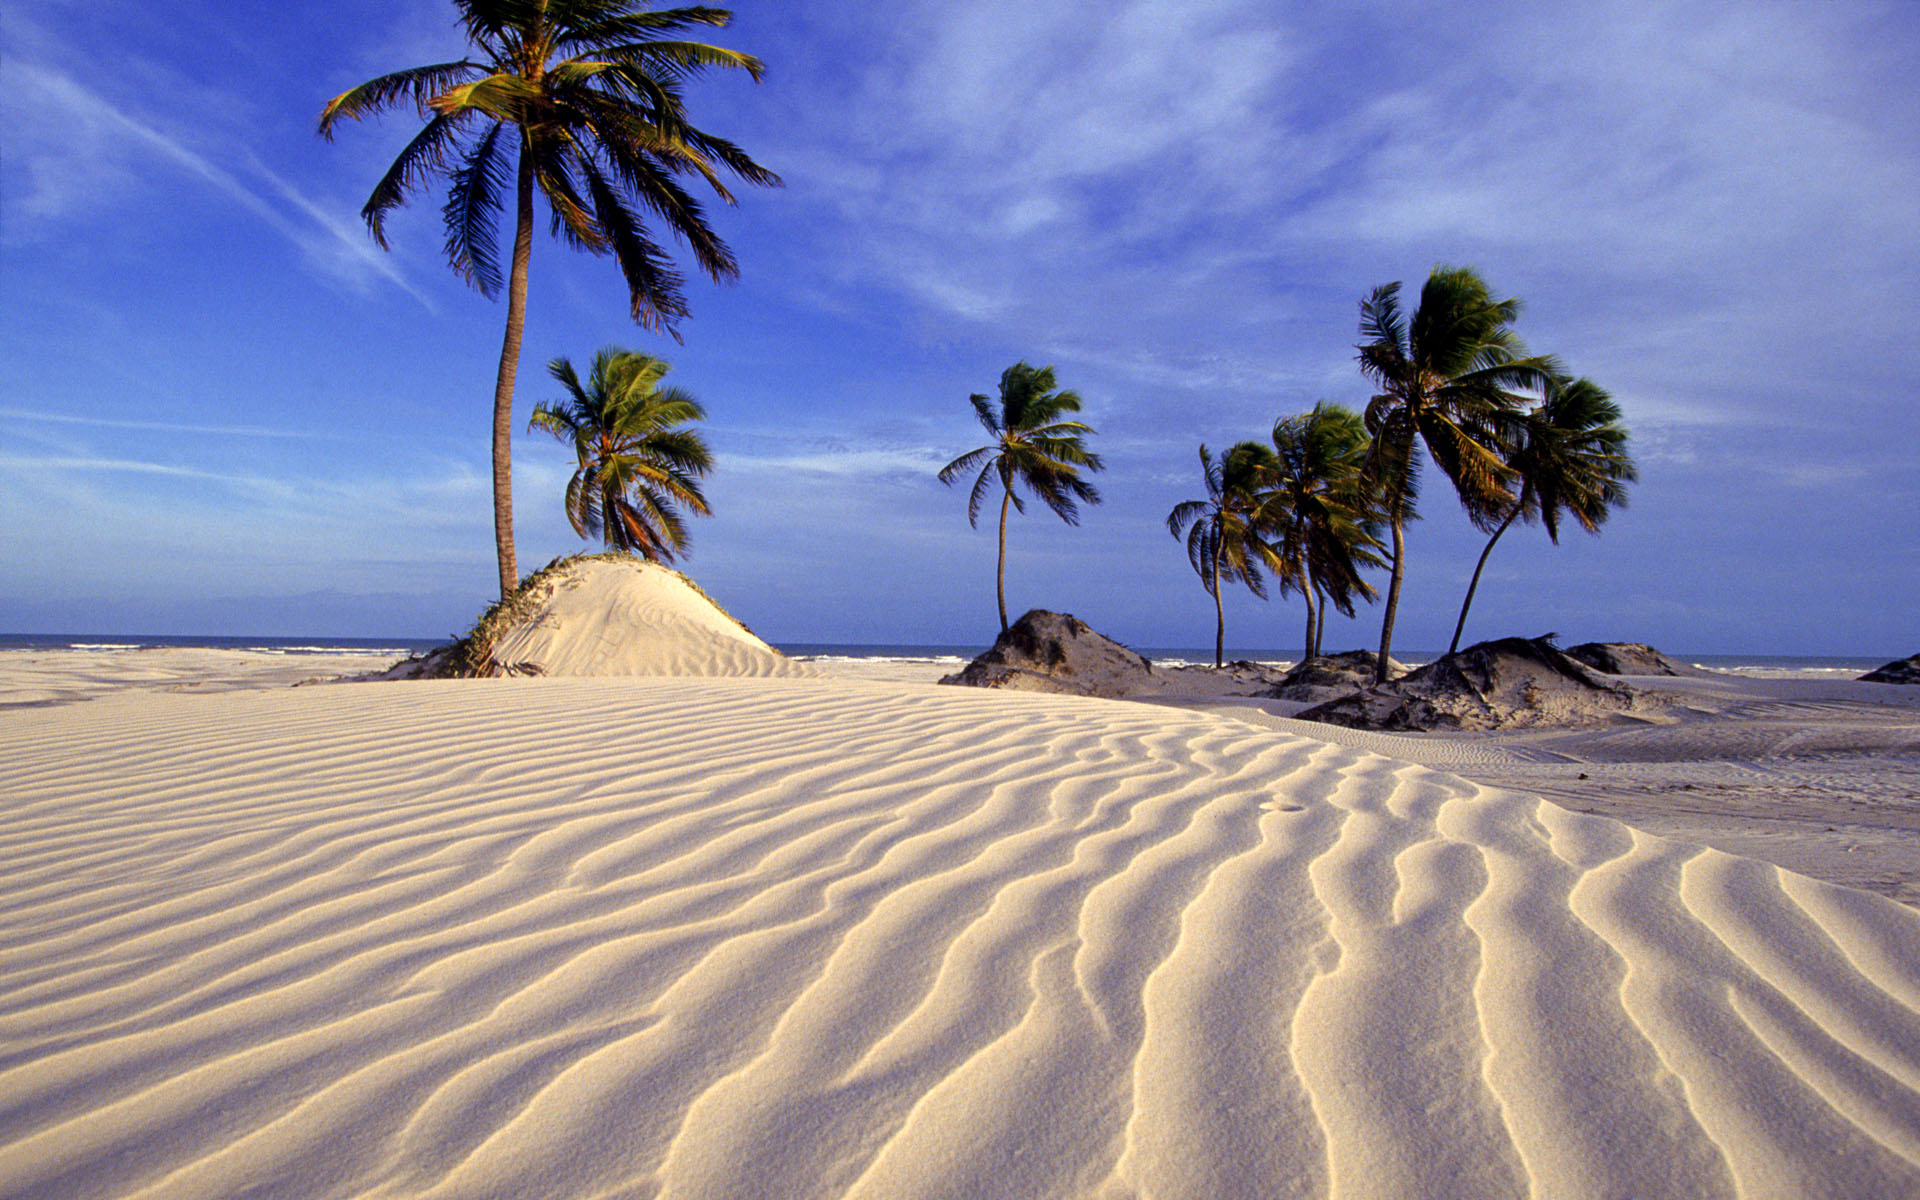 Beach And Palm Trees In Brazil Wallpaper Image